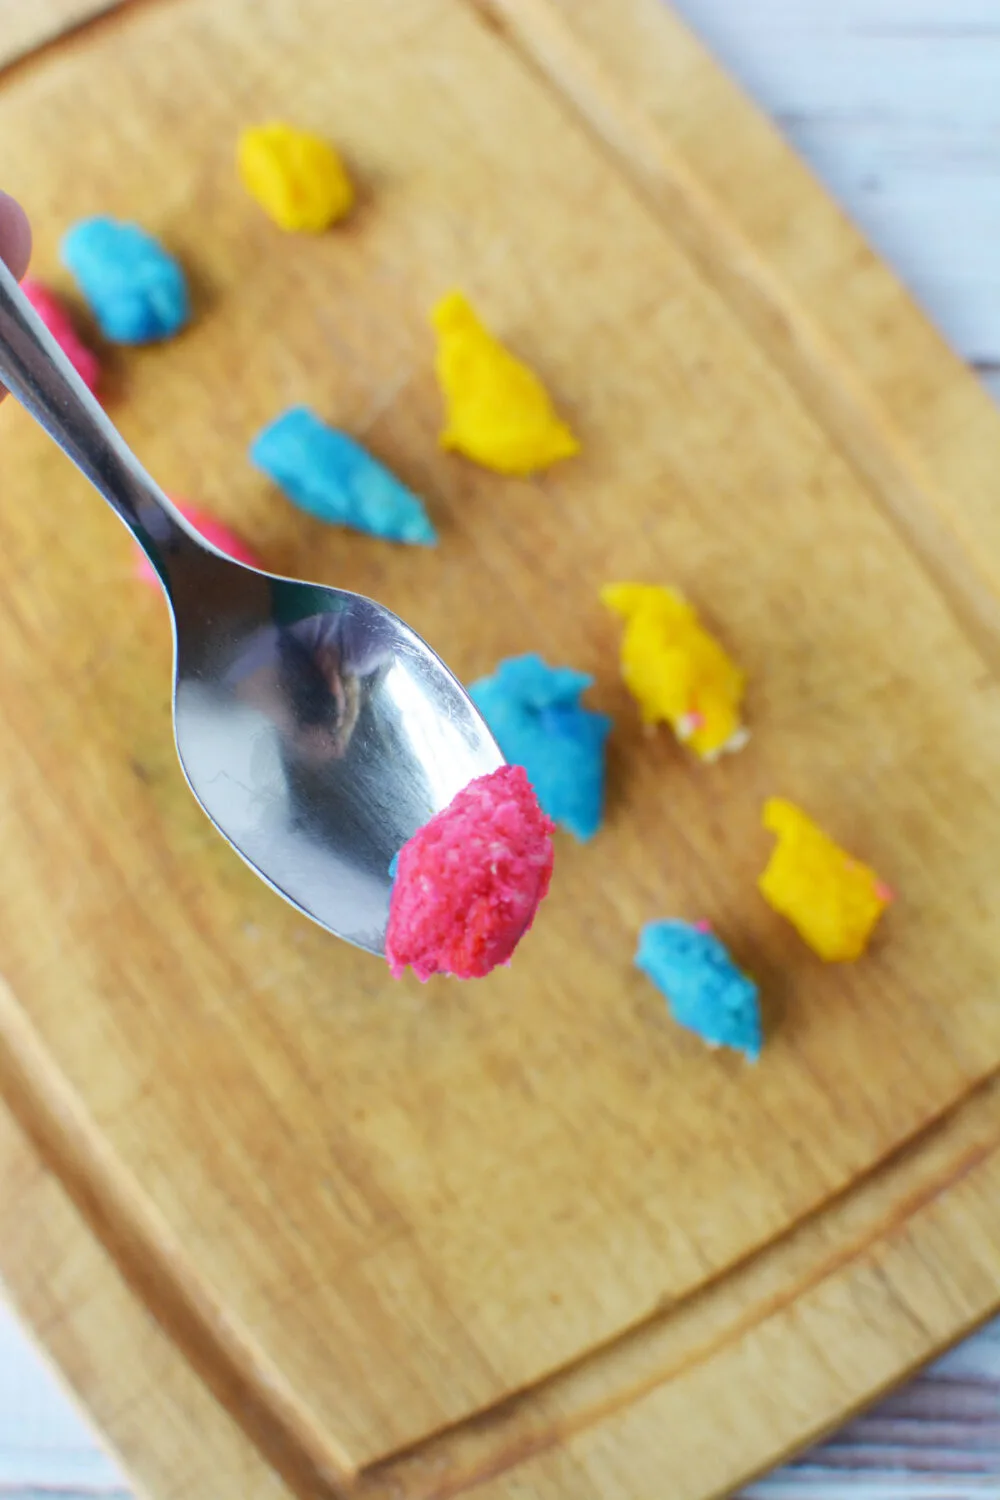 Spoon of pink cookie dough.